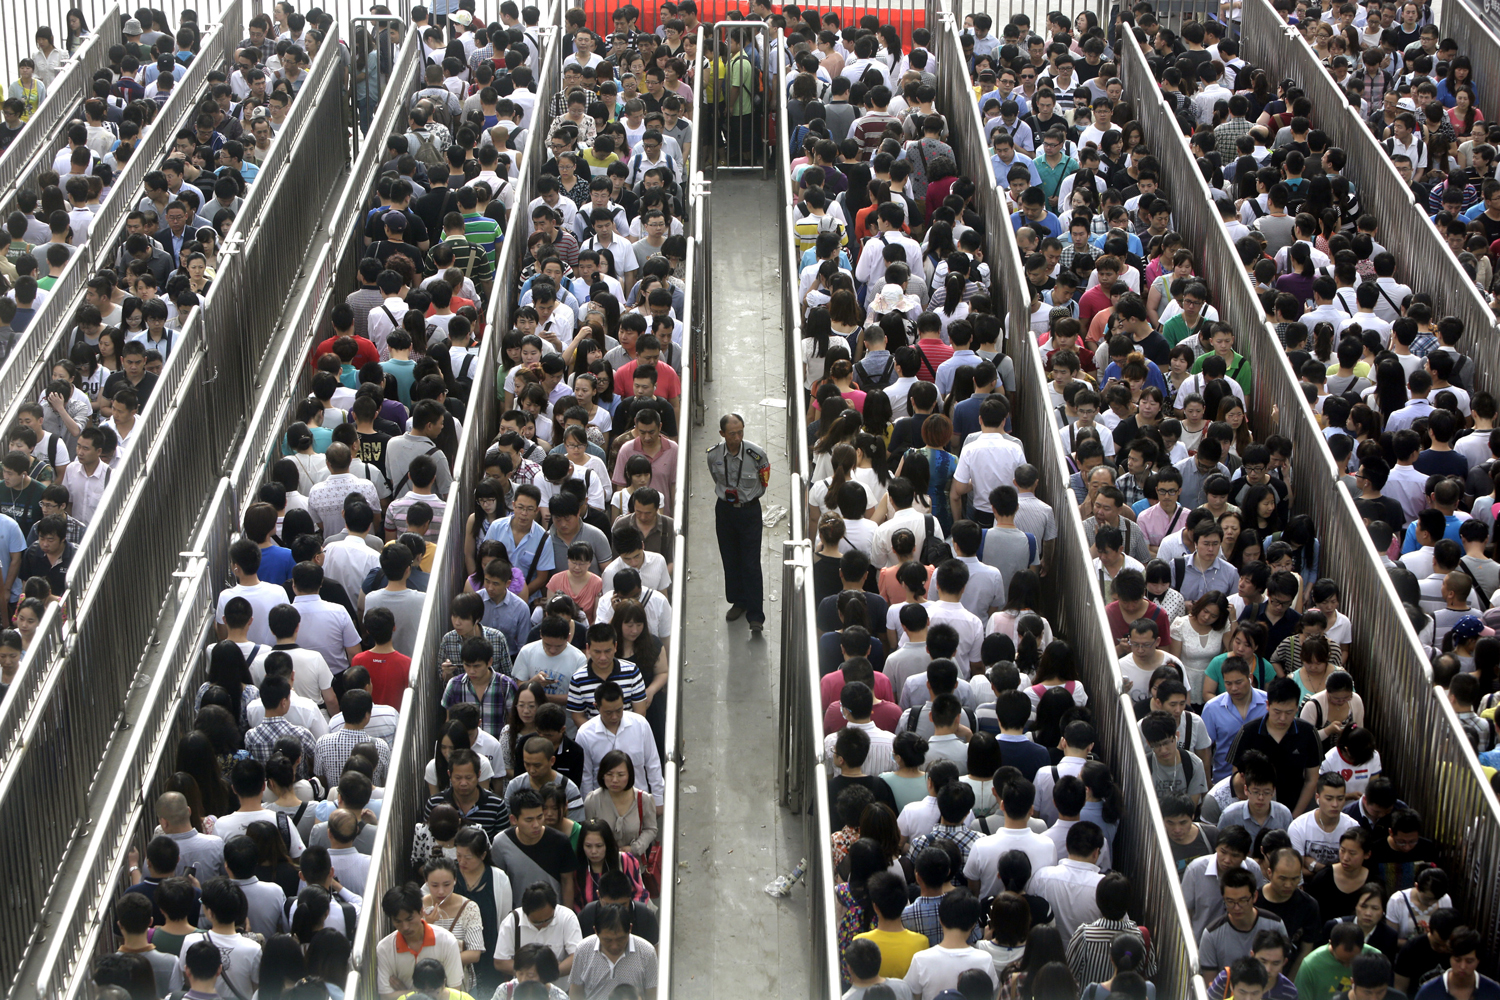 A security officer stands guard as passengers line up and wait for a security check during morning rush hour at Tiantongyuan North Station in Beijing May 27, 2014. 